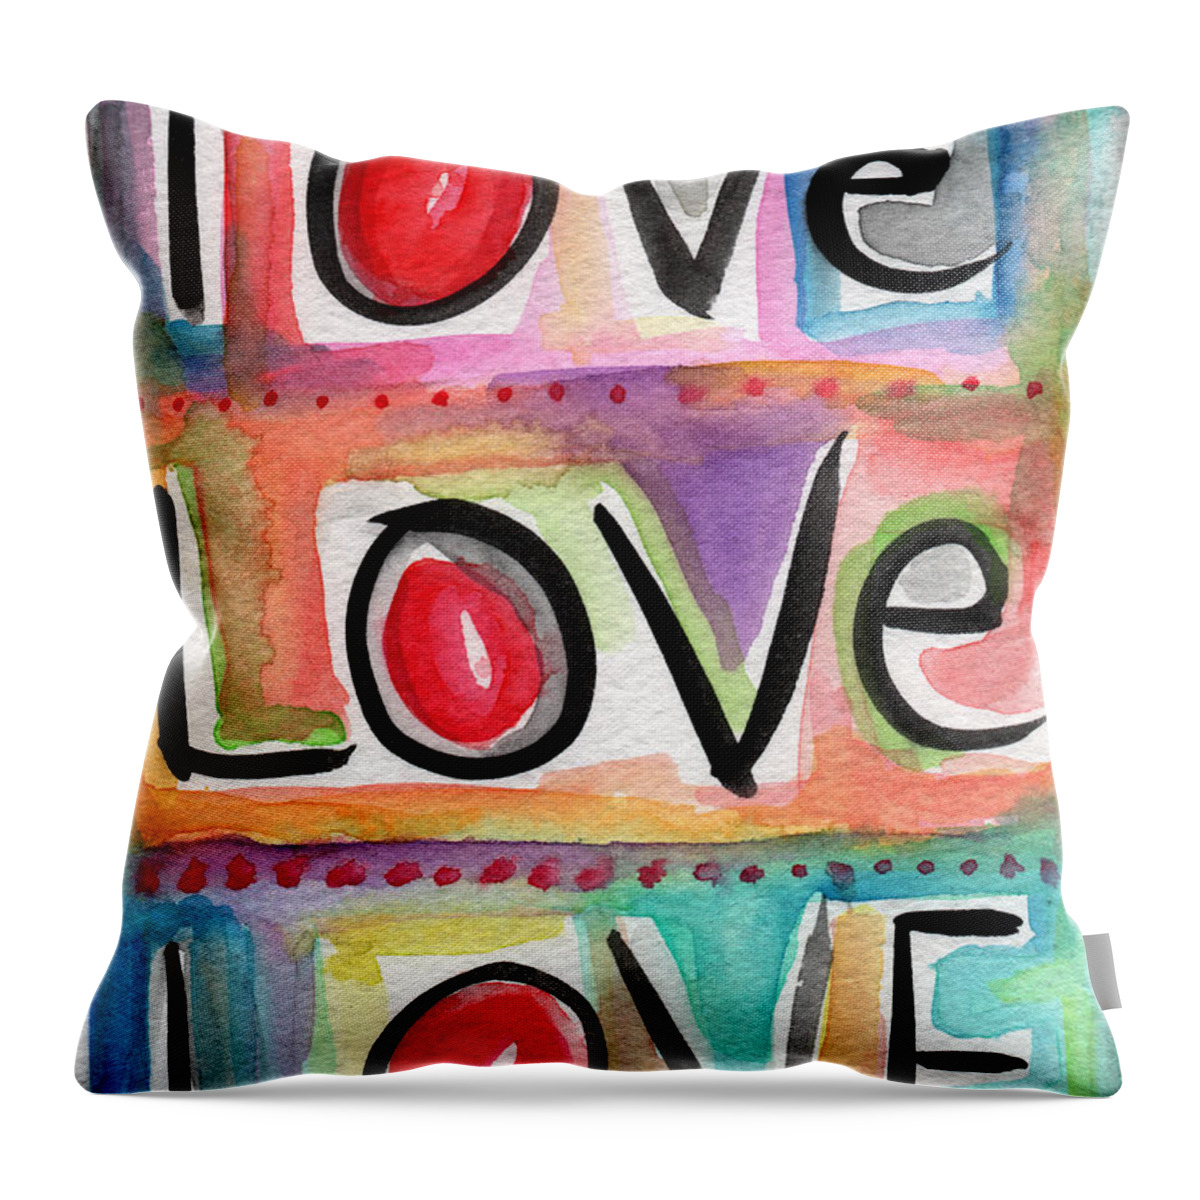 Love Throw Pillow featuring the mixed media Love by Linda Woods